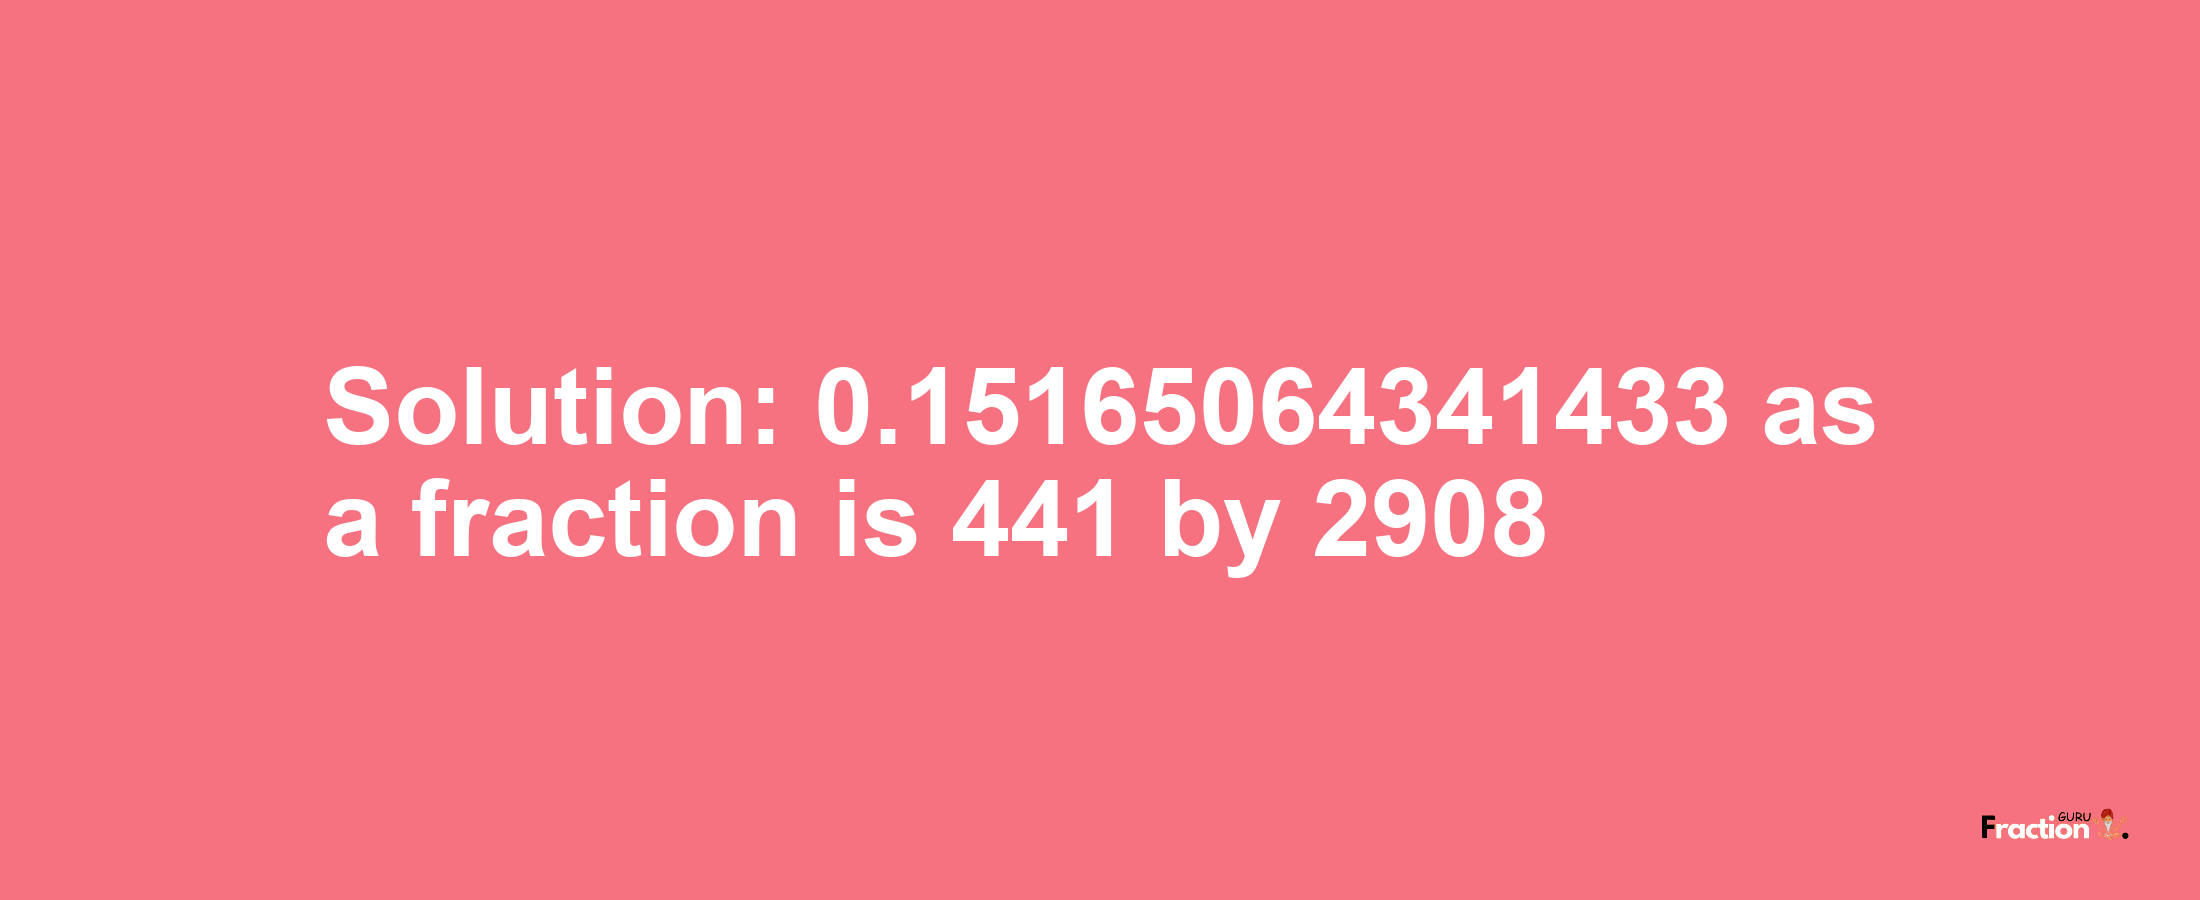 Solution:0.15165064341433 as a fraction is 441/2908